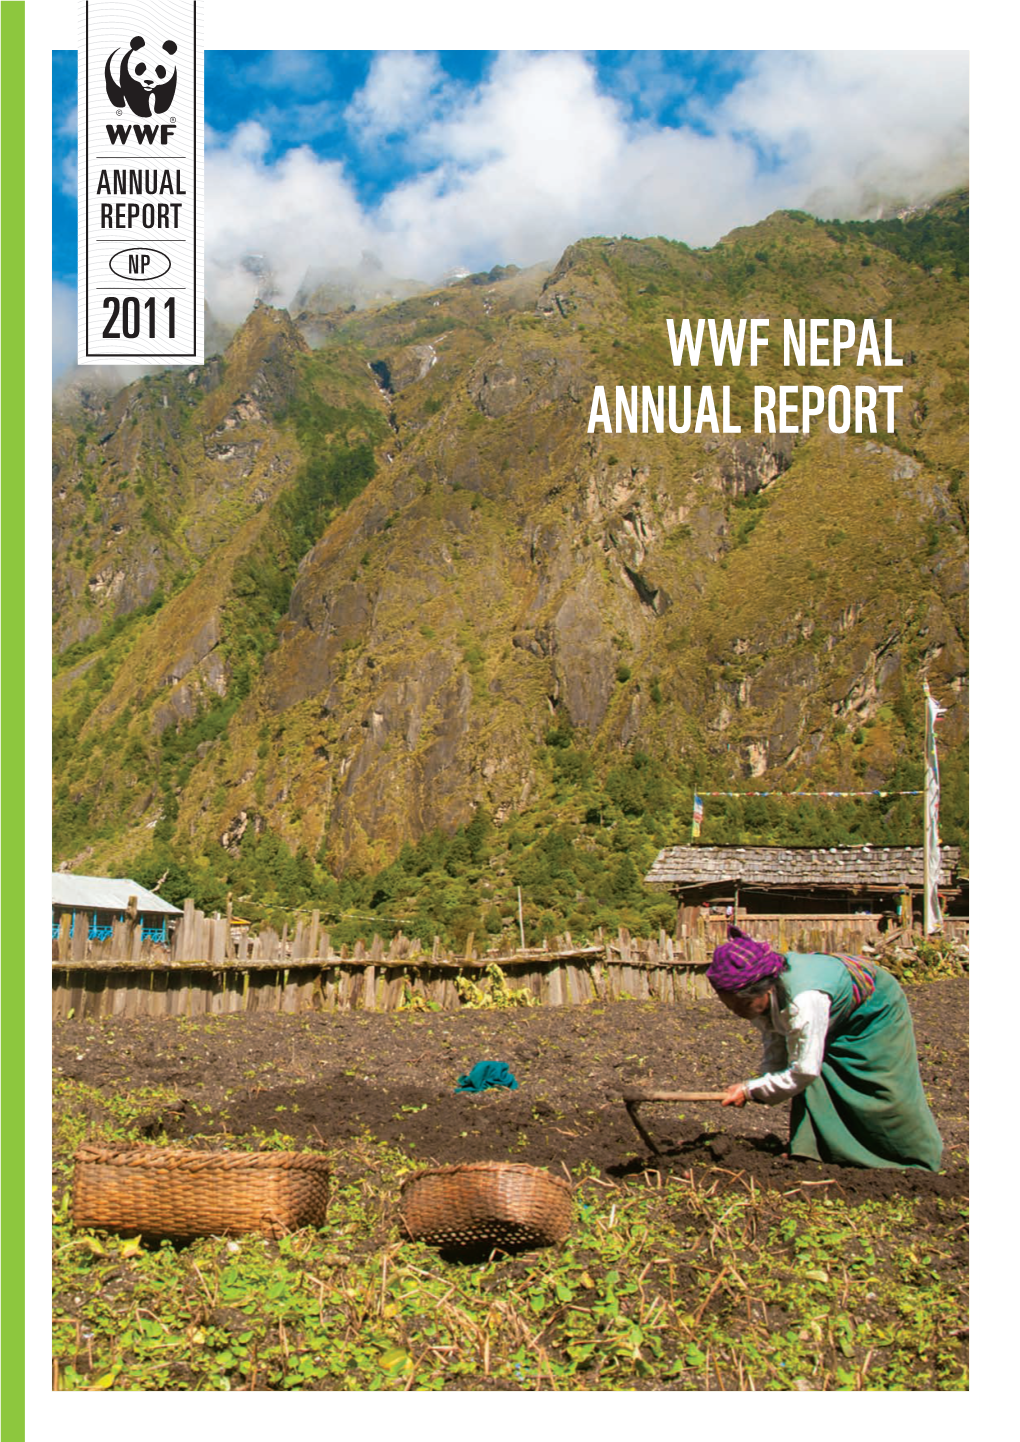 WWF NEPAL ANNUAL REPORT CONTENTS OVERVIEW Message from the Country Representative 02 WWF in Nepal 04